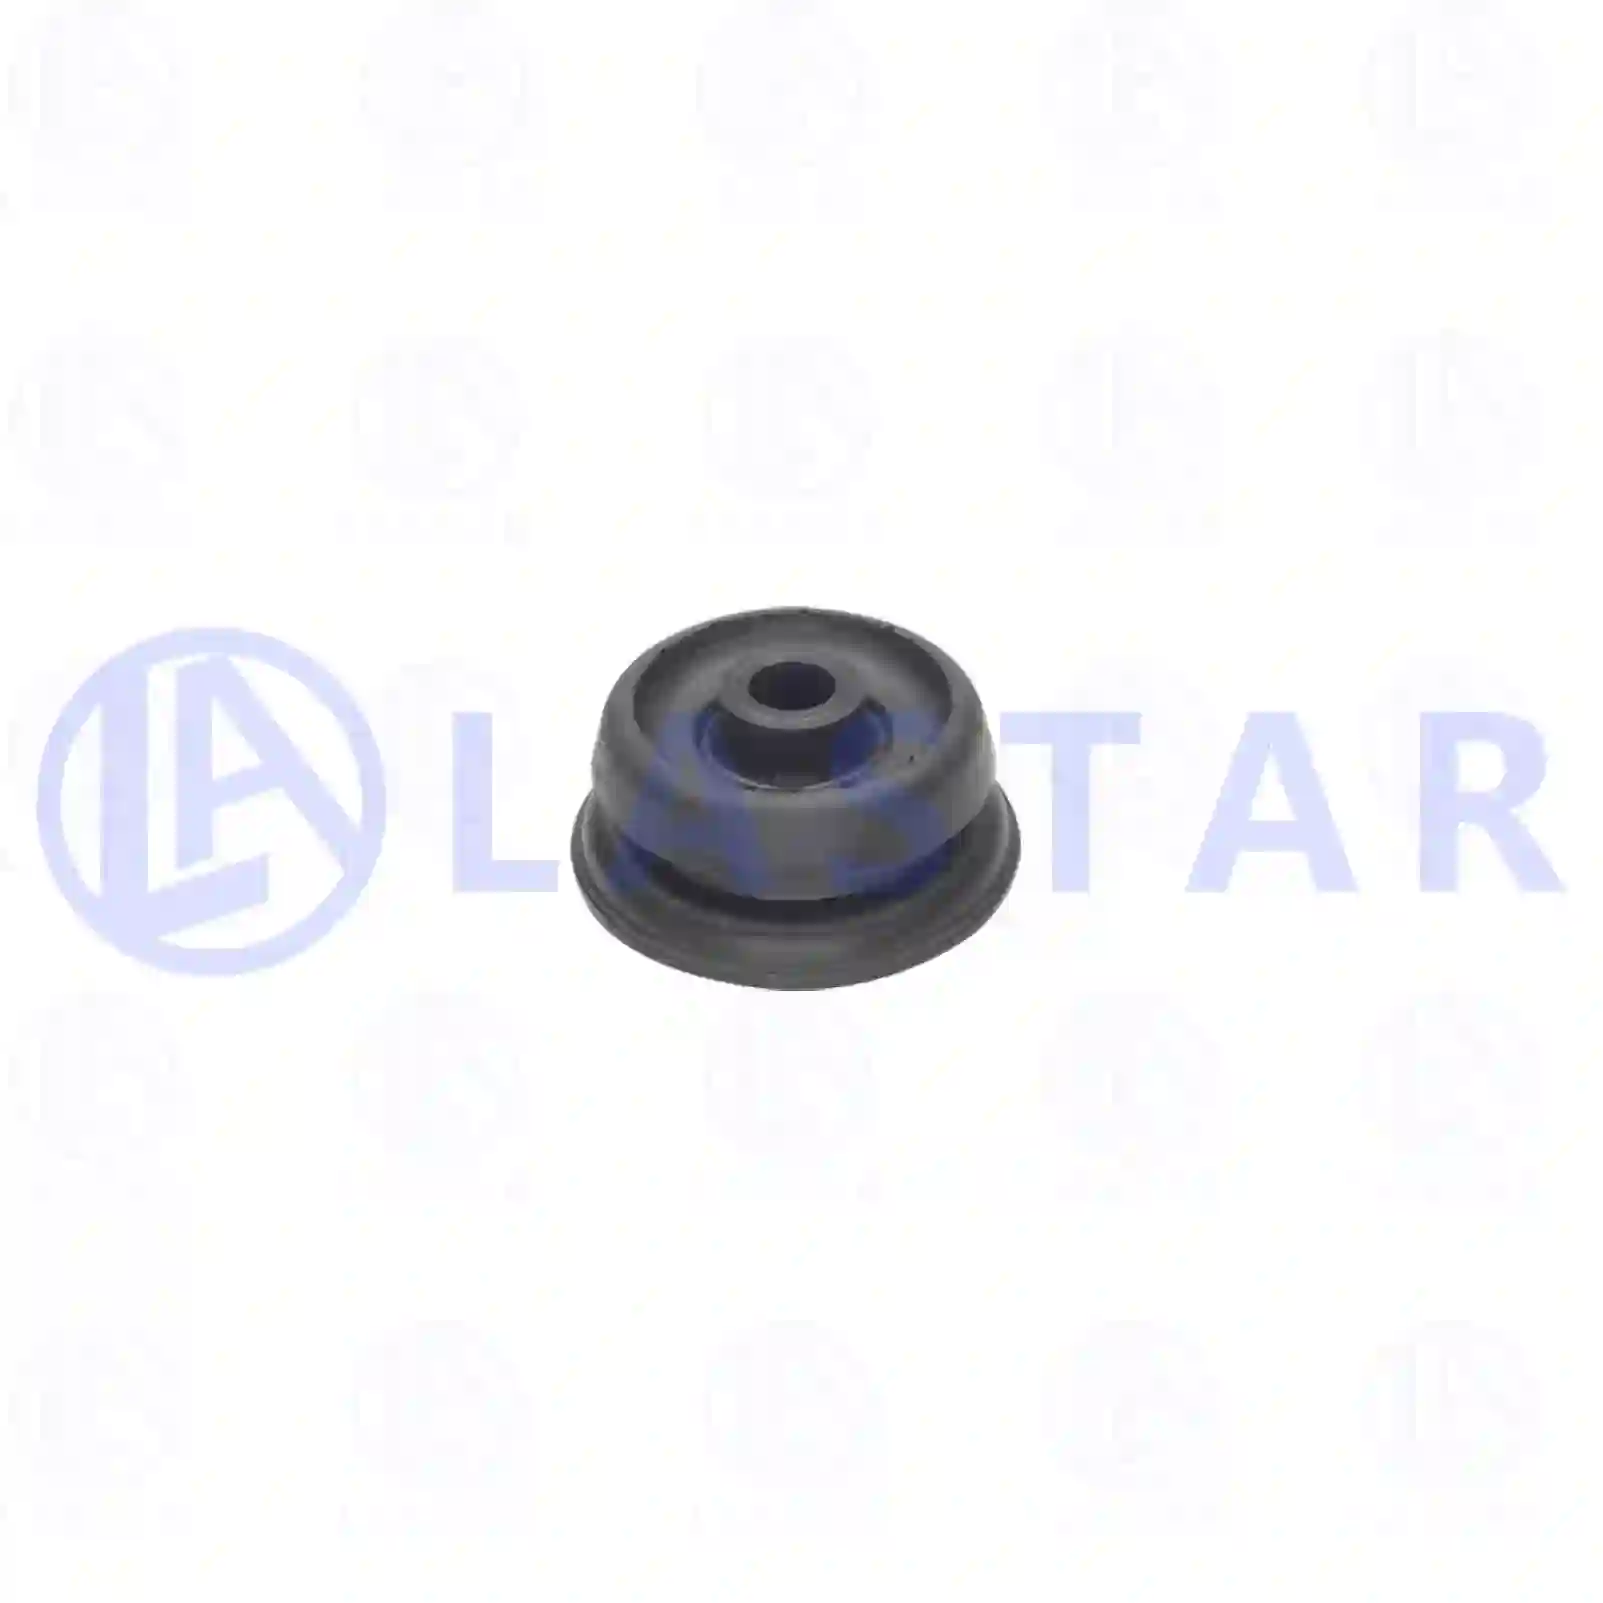 Rubber bushing, shock absorber, 77735101, 9013231185, 2D0407183A, ||  77735101 Lastar Spare Part | Truck Spare Parts, Auotomotive Spare Parts Rubber bushing, shock absorber, 77735101, 9013231185, 2D0407183A, ||  77735101 Lastar Spare Part | Truck Spare Parts, Auotomotive Spare Parts